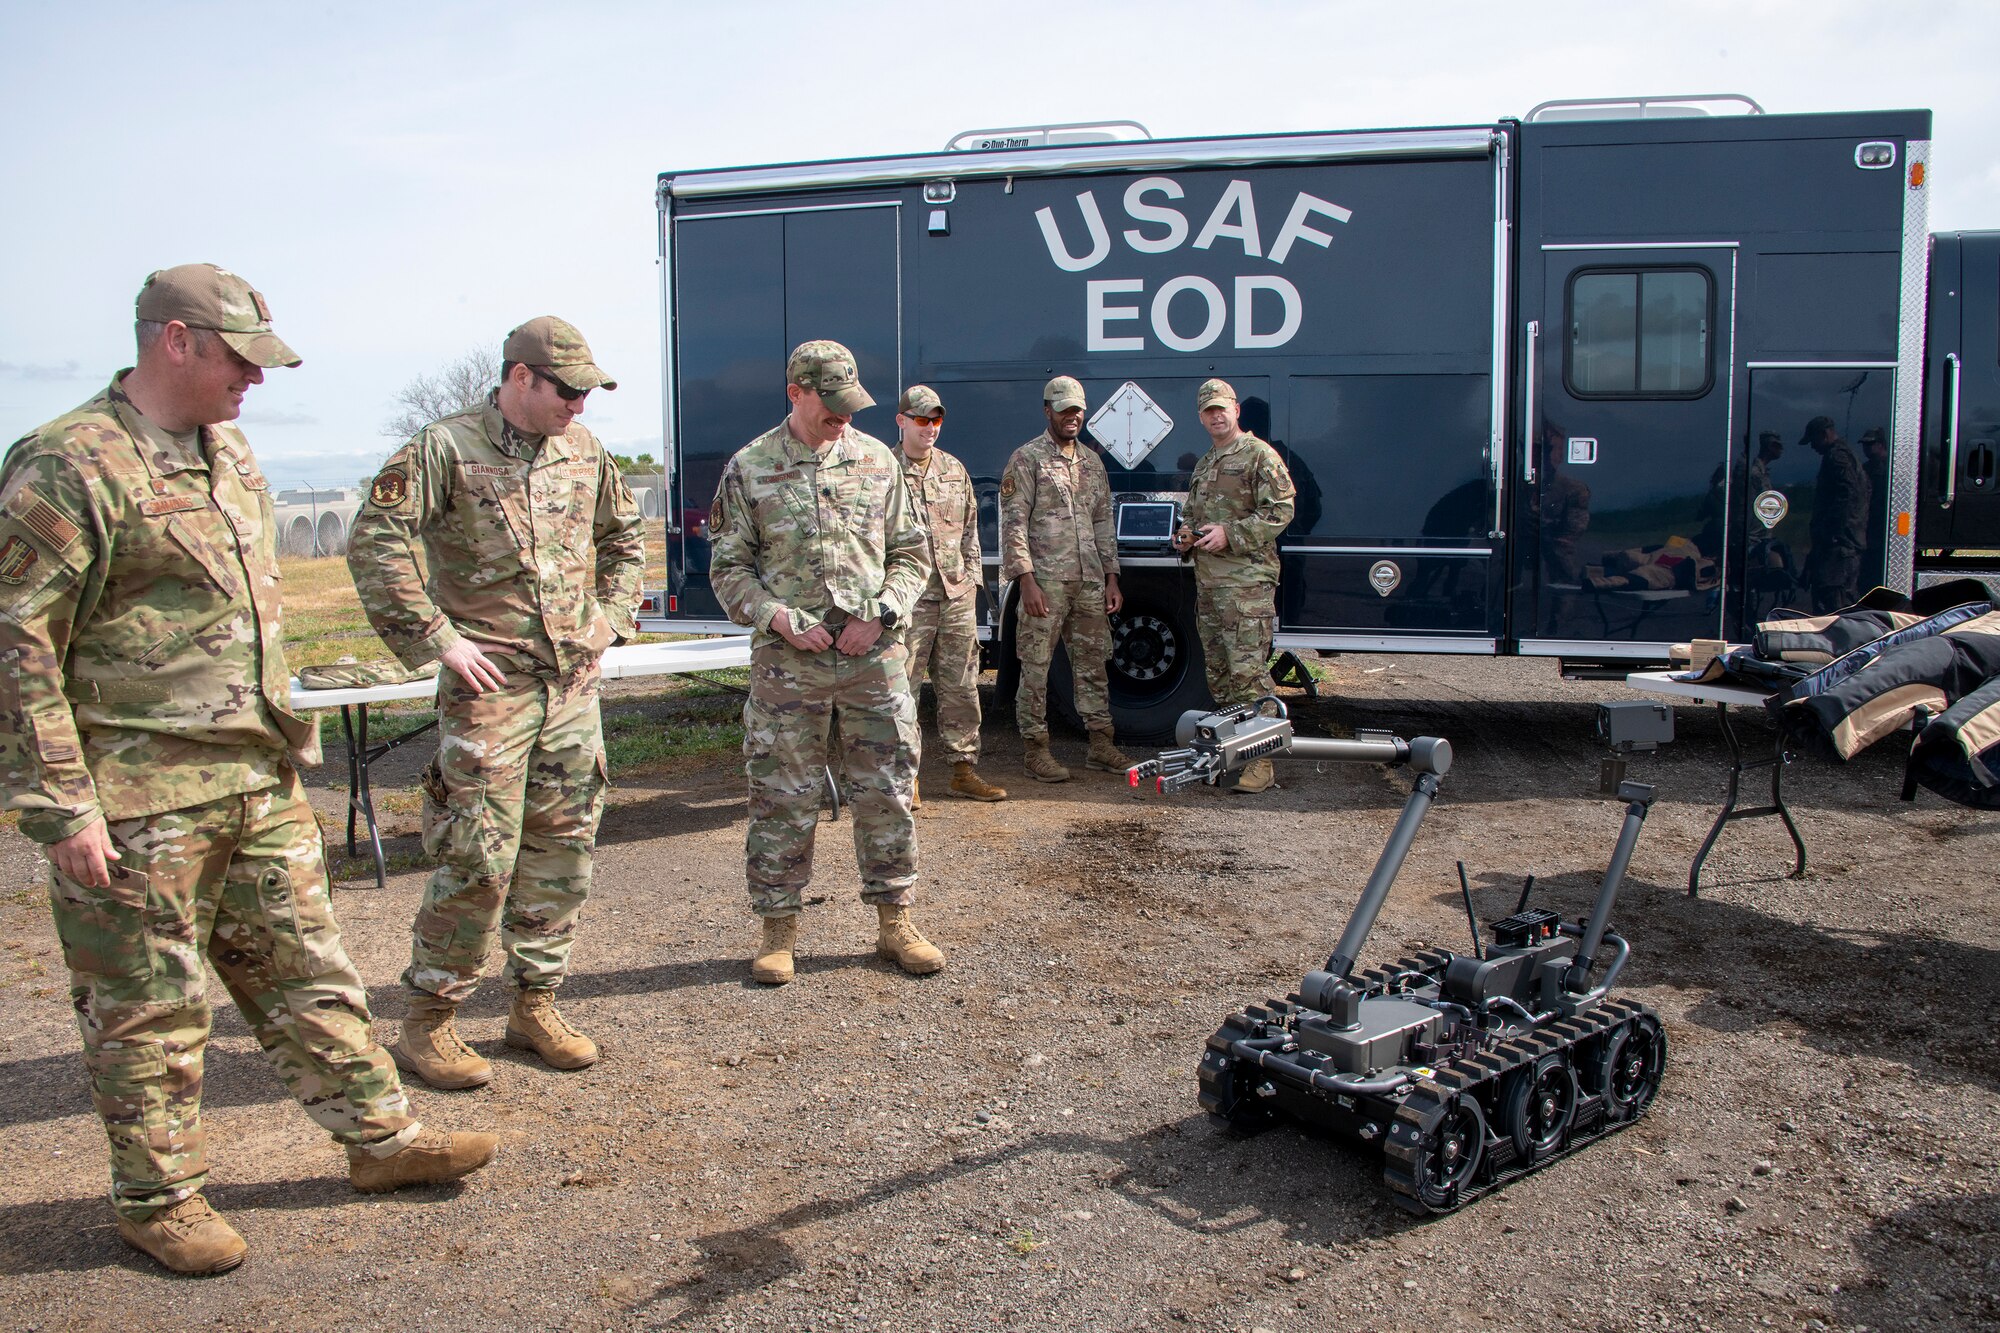 U.S. Air Force Col. Corey Simmons, left, 60th Air Mobility Wing commander, and members assigned to 60th Civil Engineer Squadron Explosive Ordnance Disposal flight watch Chief Master Sgt. Keith Scott, center right, 60th AMW command chief, operate a bomb disposal robot during a visit to the EOD range at Travis Air Force Base, California, March 15, 2022. Trained to detect, disarm and dispose of explosive threats in extreme environments, EOD technicians serve as the Air Force’s bomb squad.  (U.S. Air Force photo by Heide Couch)